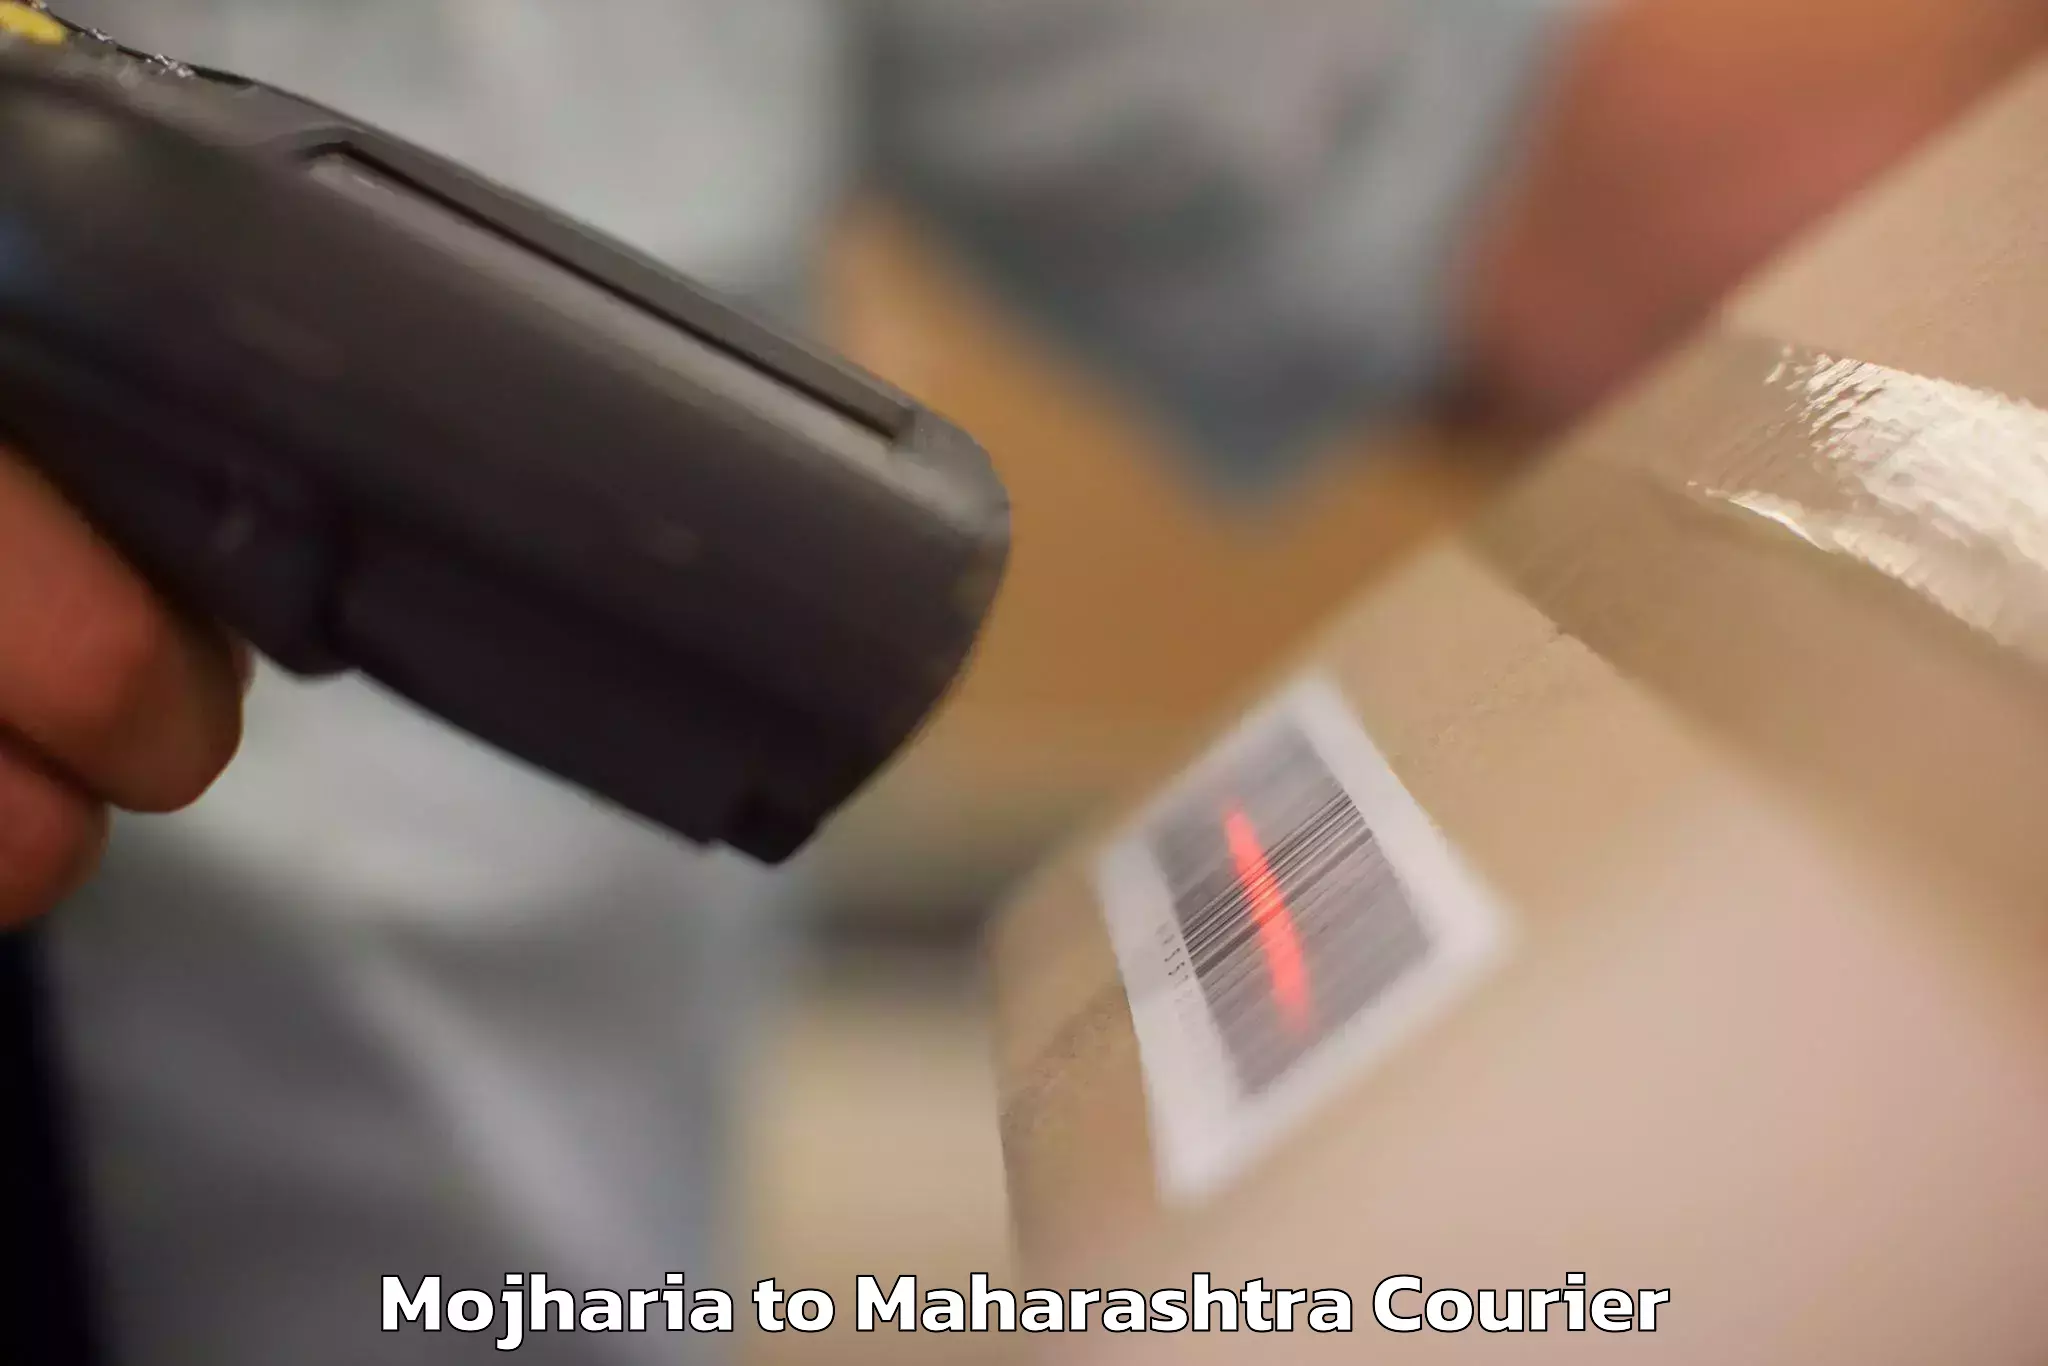 Luggage transport consultancy Mojharia to Ojhar